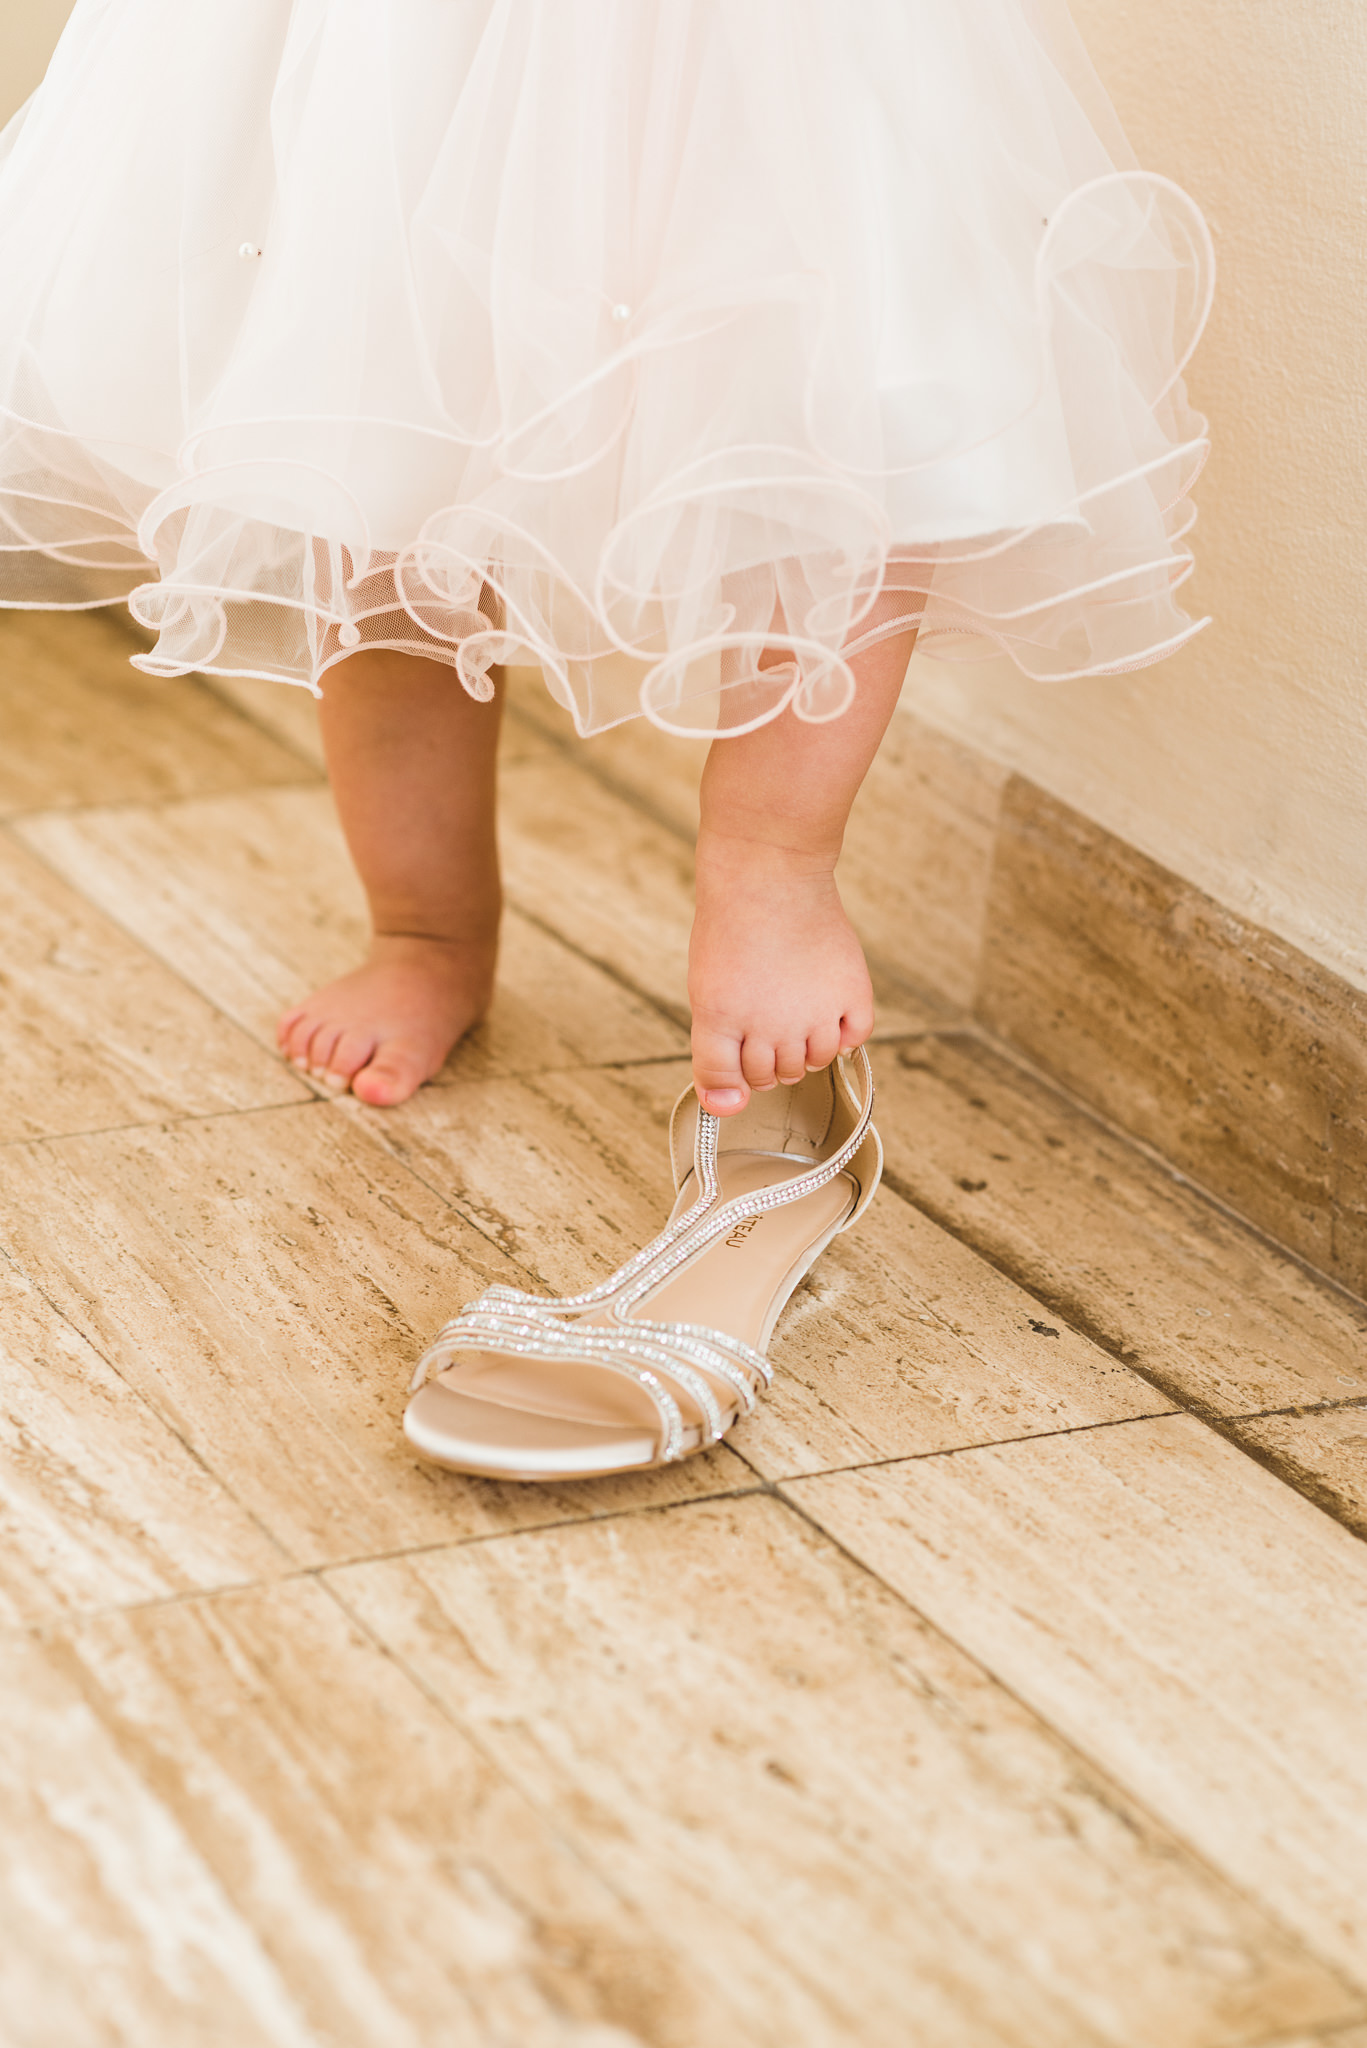 baby in a dress trying to get her foot into brides wedding shoe before ceremony at Now Sapphire Resort in Mexico